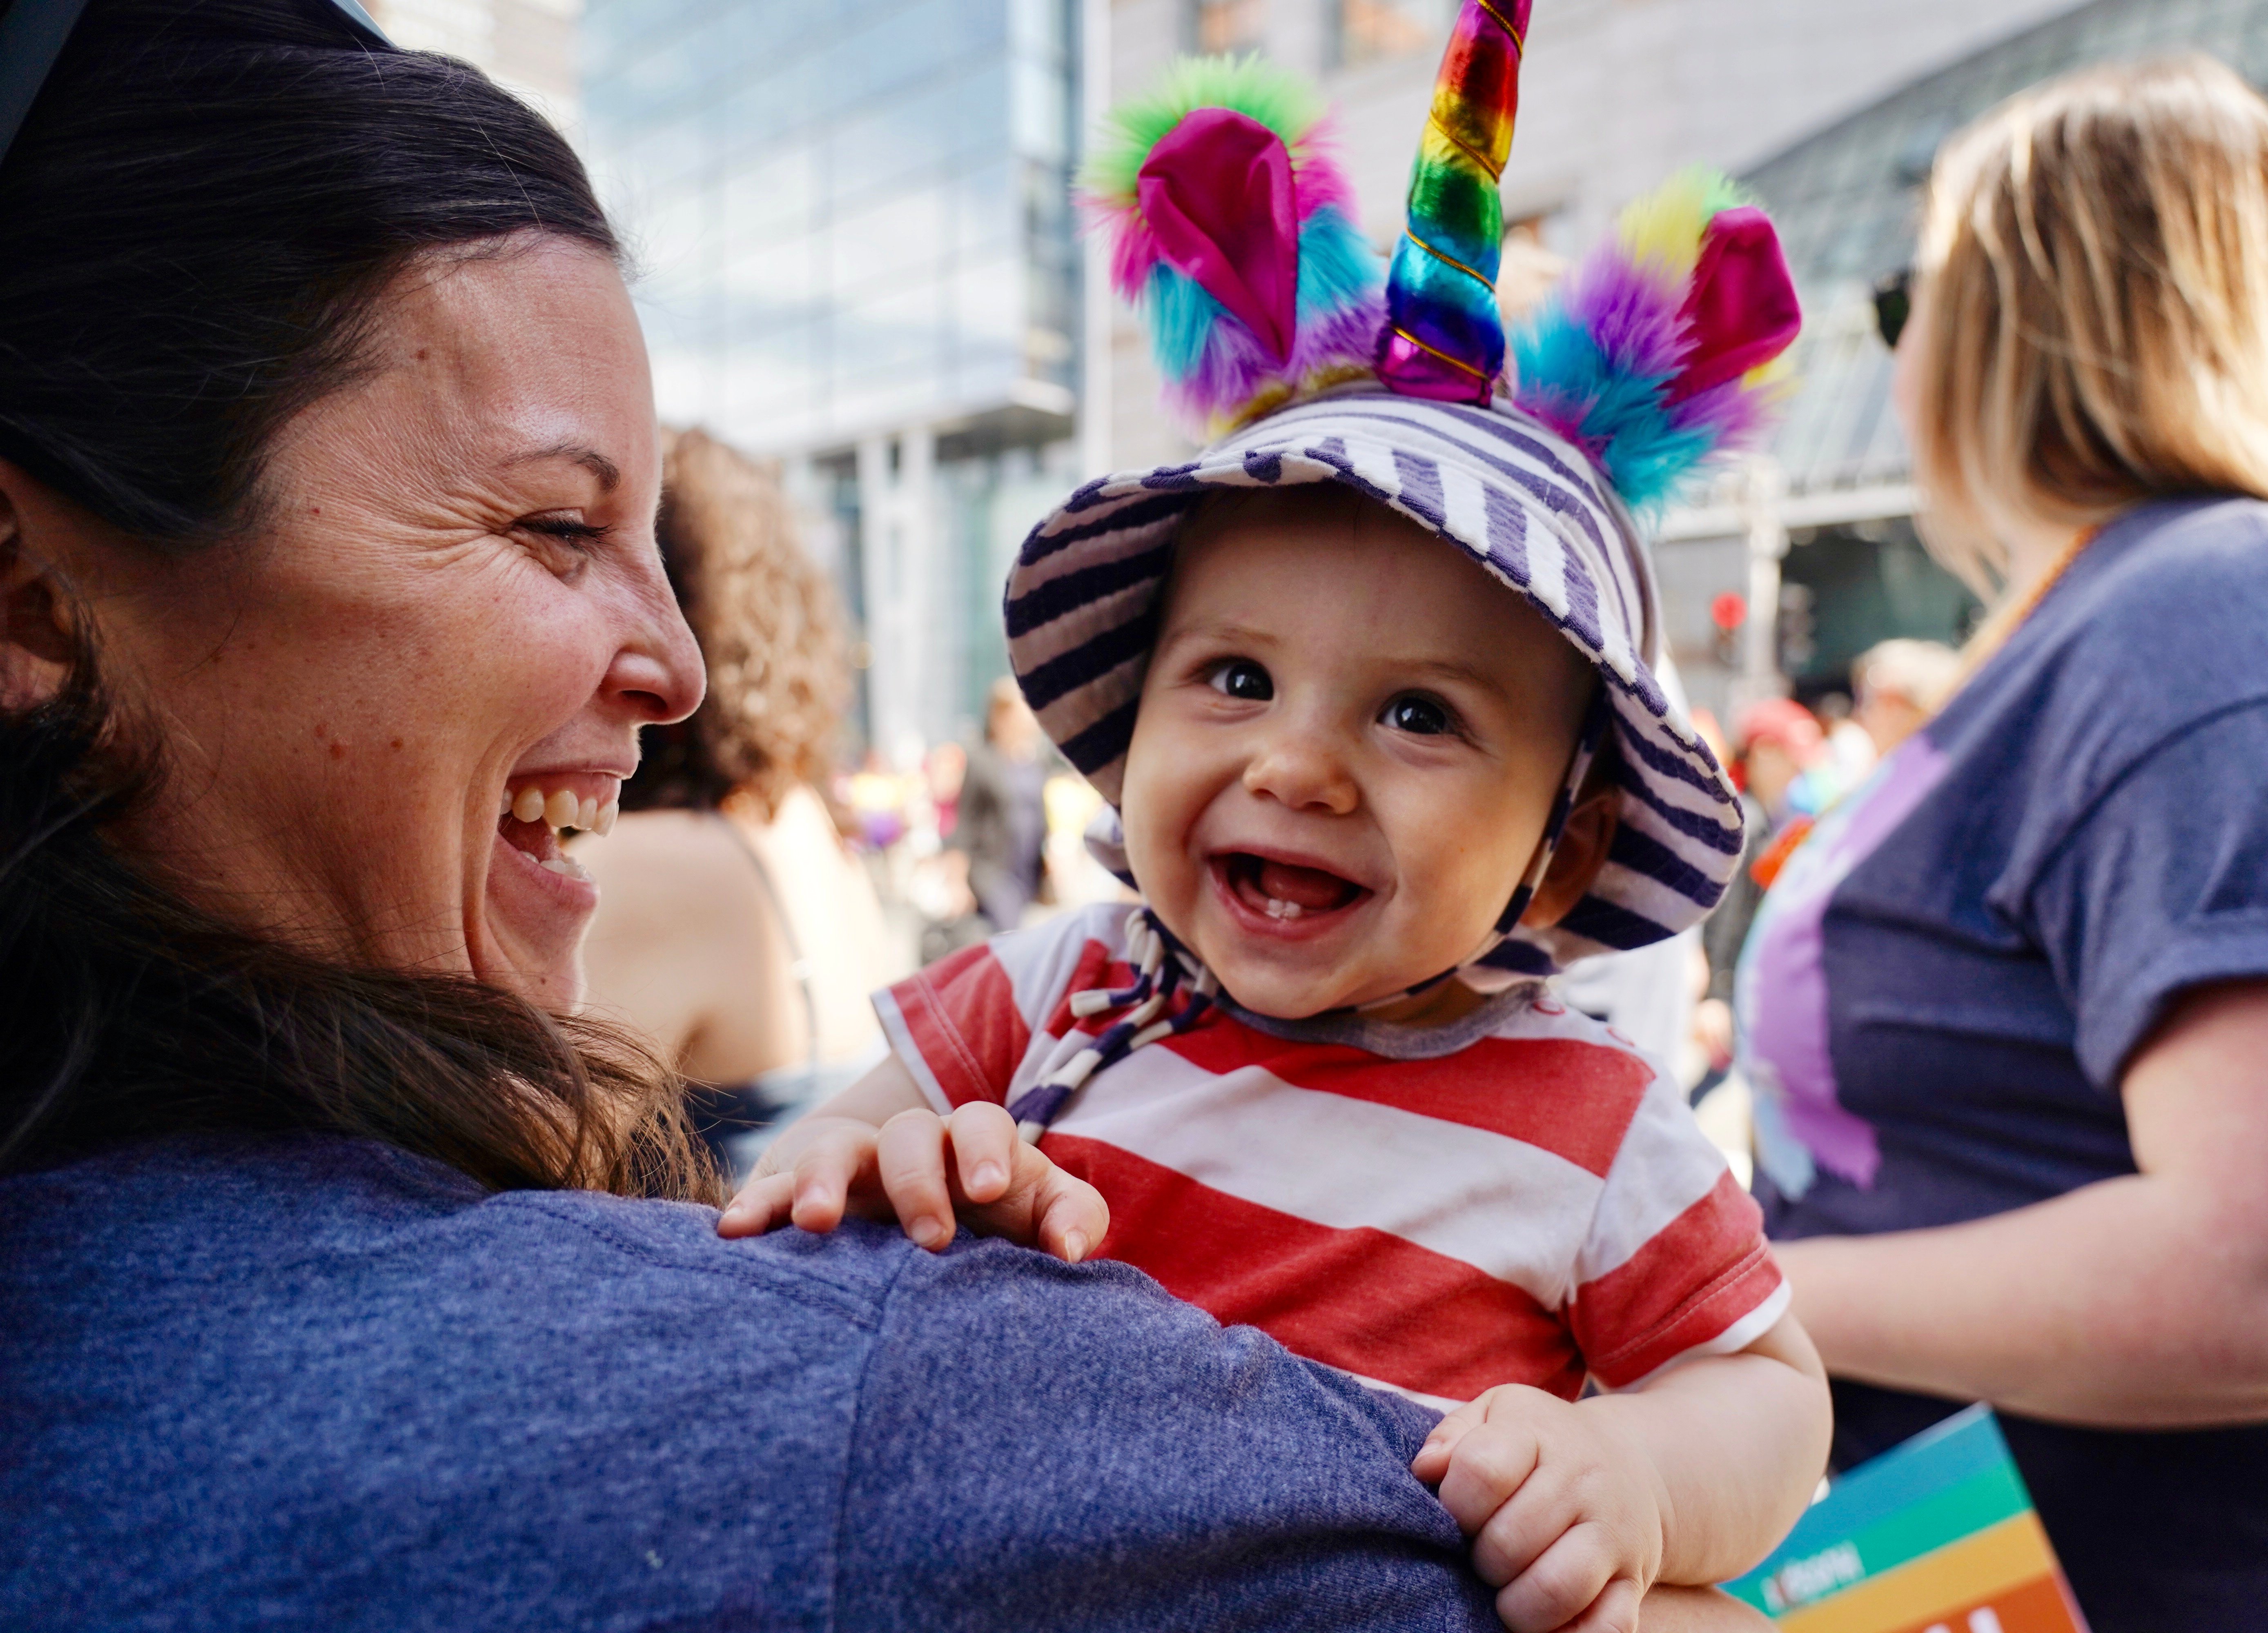 HubSpot Named the #3 Best Workplace for Parents by Great Place to Work® and FORTUNE